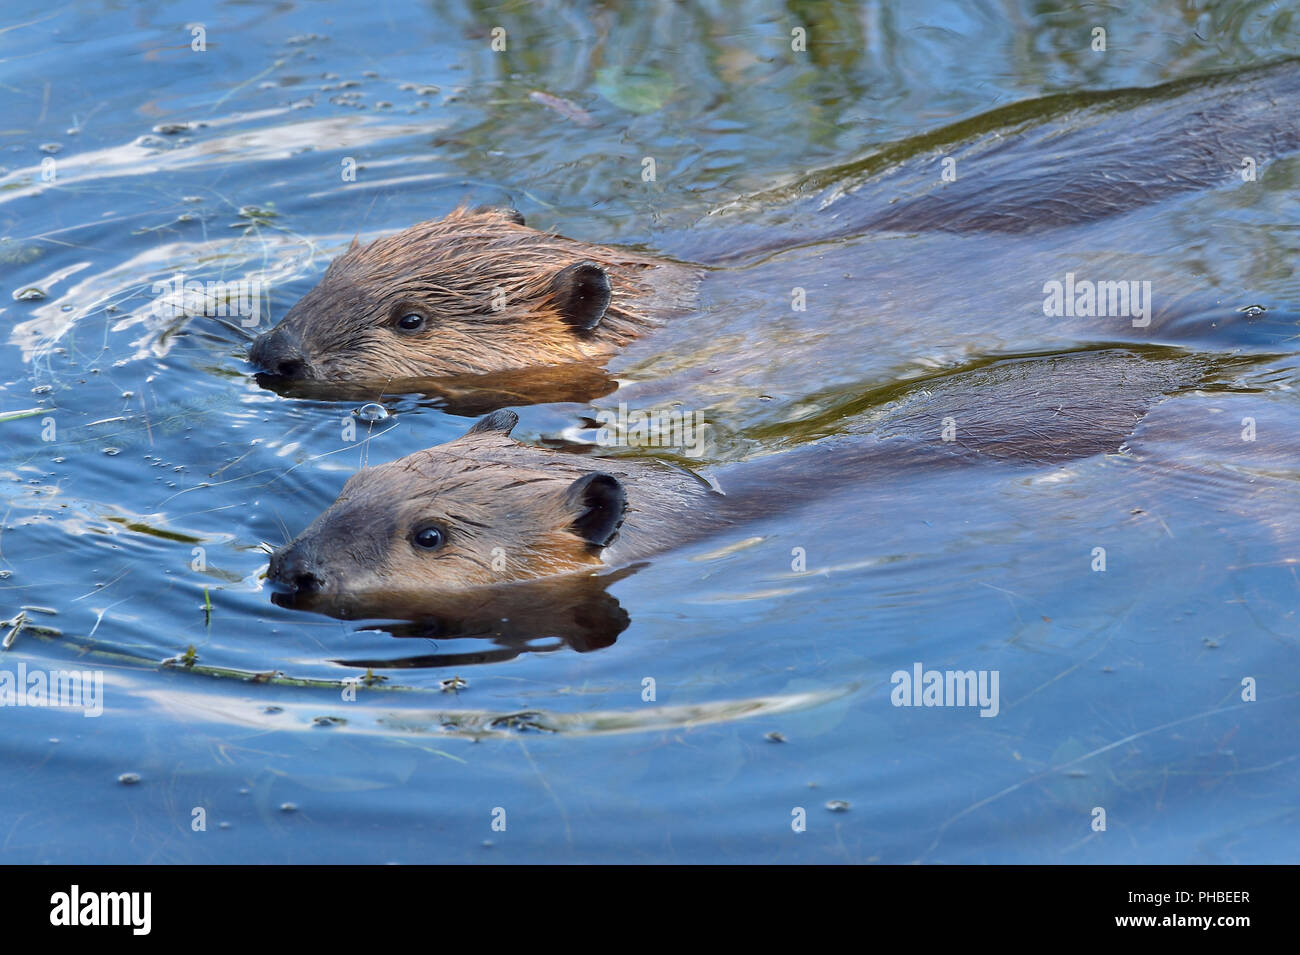 Two adult beavers  'Castor canadenis';  swimming side by side in the water of their beaver pond in rural Alberta Canada Stock Photo